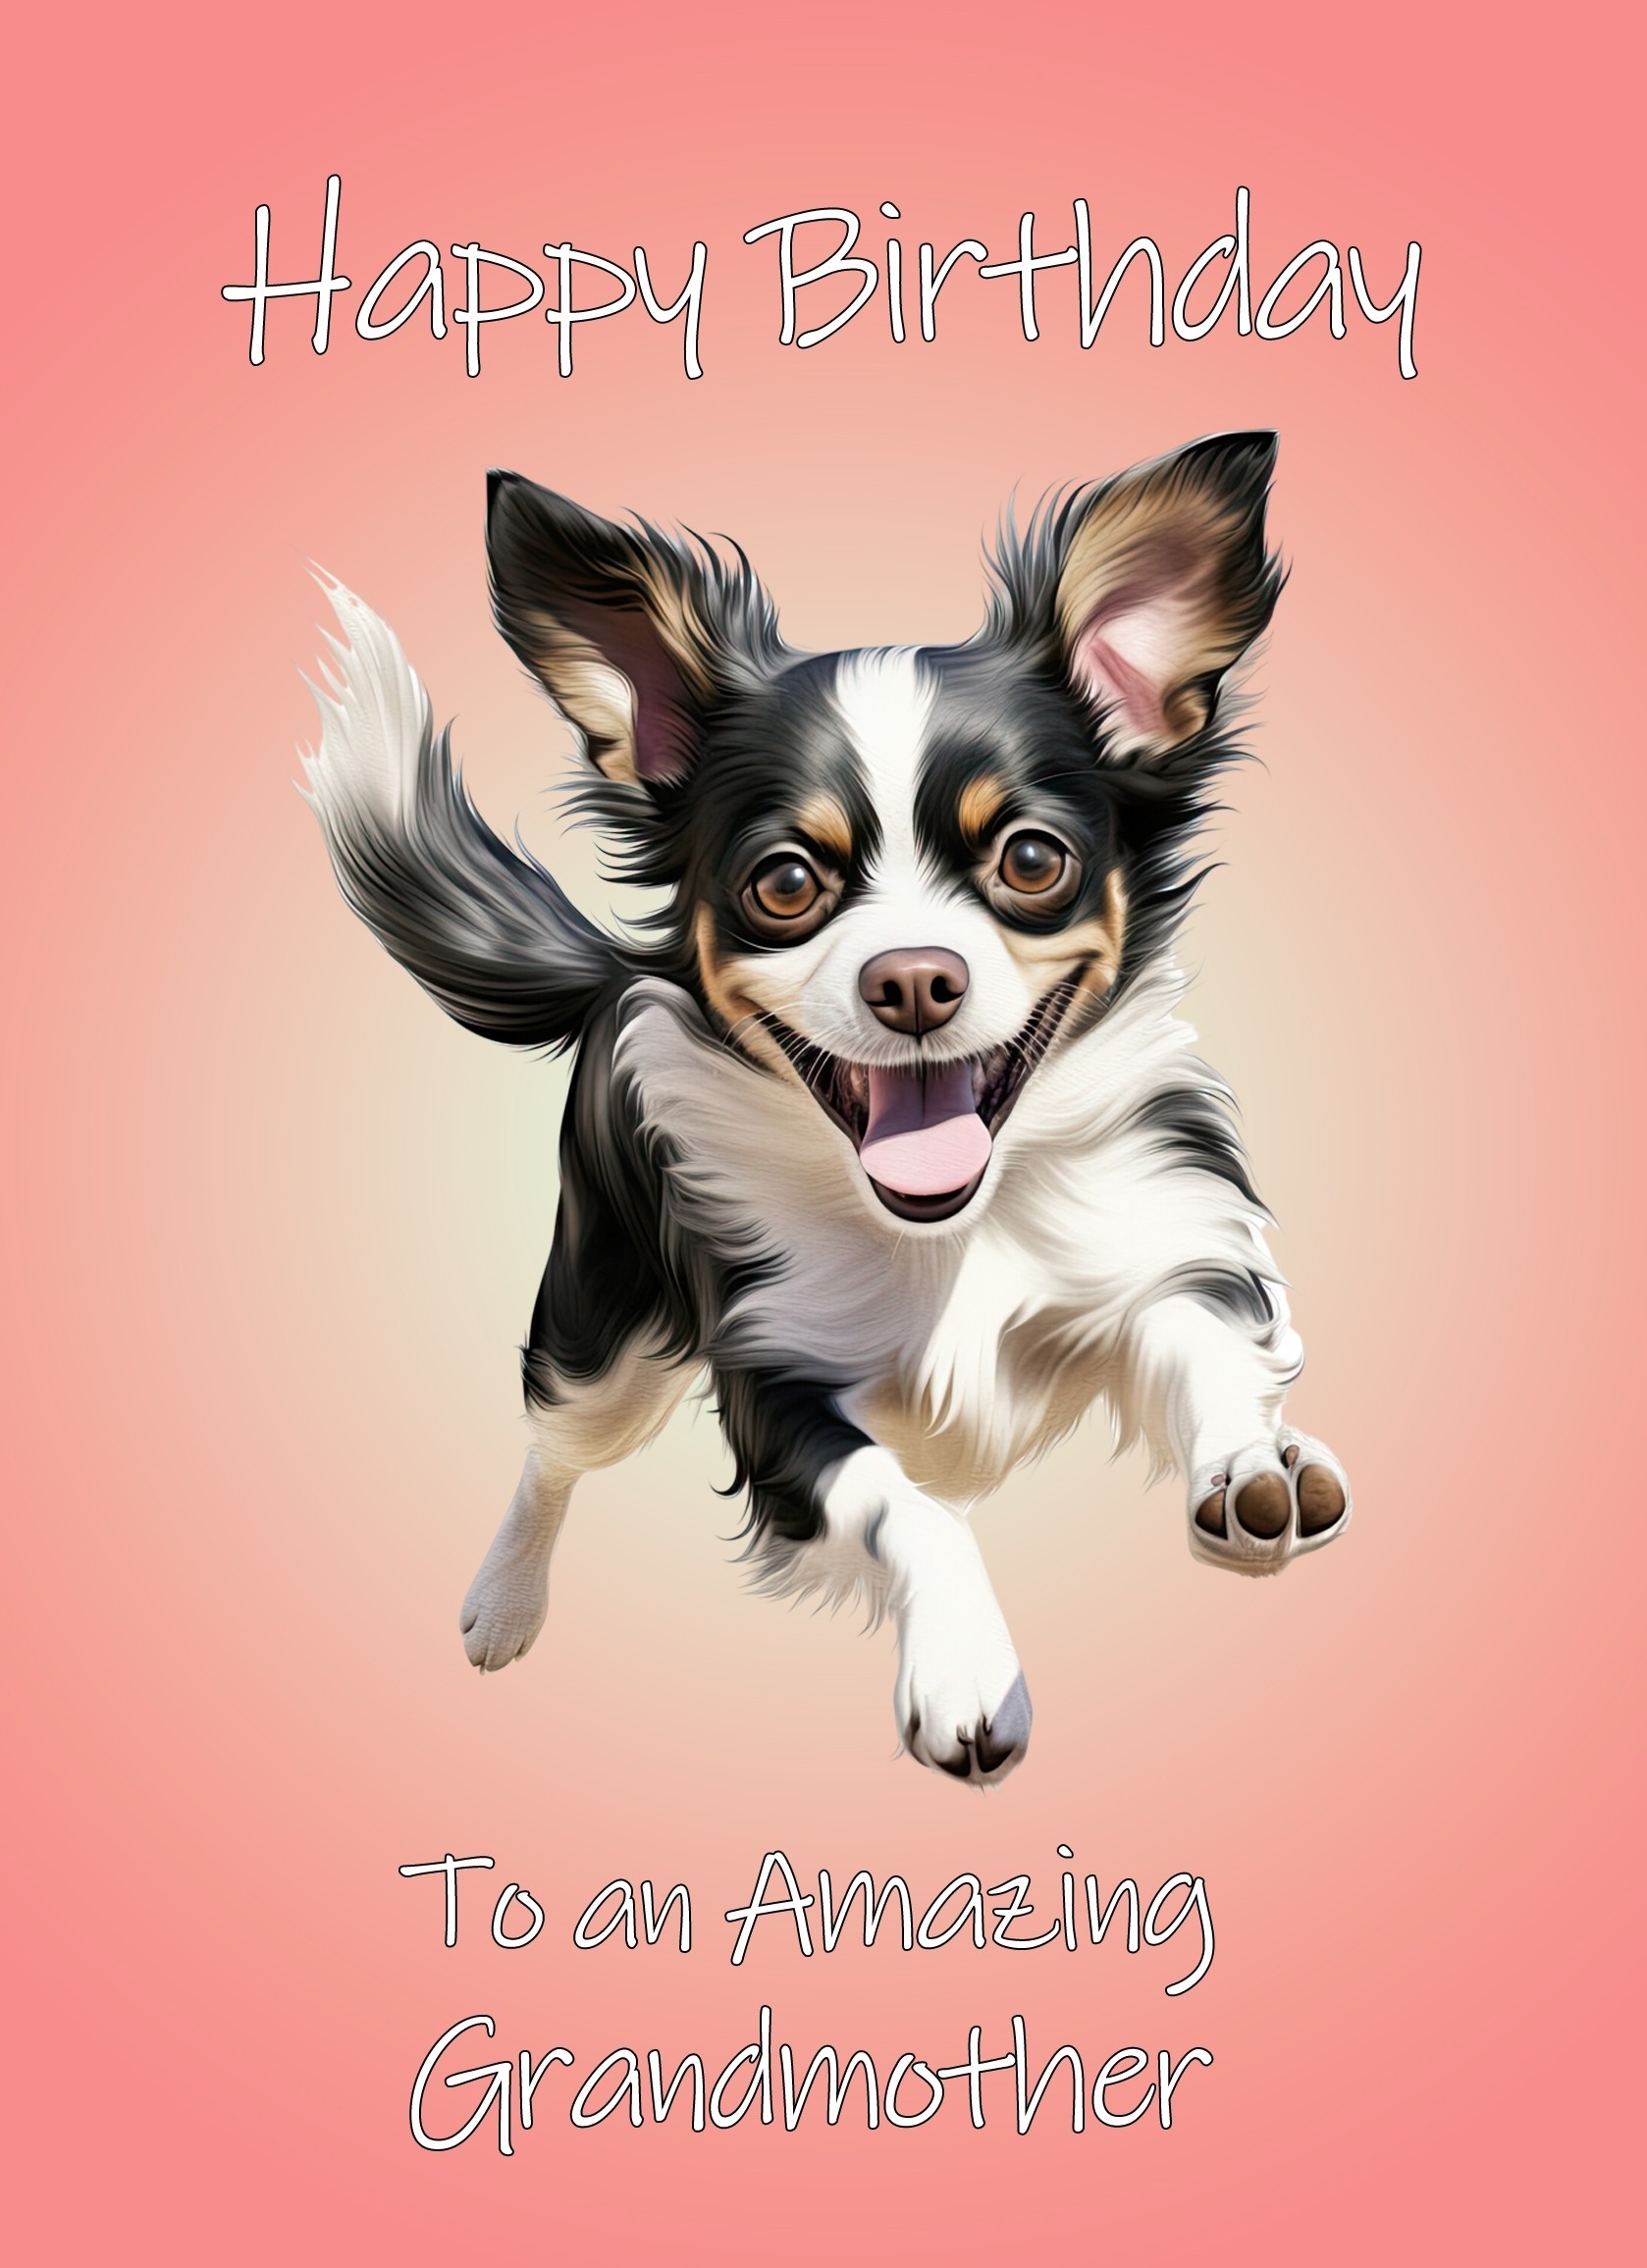 Chihuahua Dog Birthday Card For Grandmother